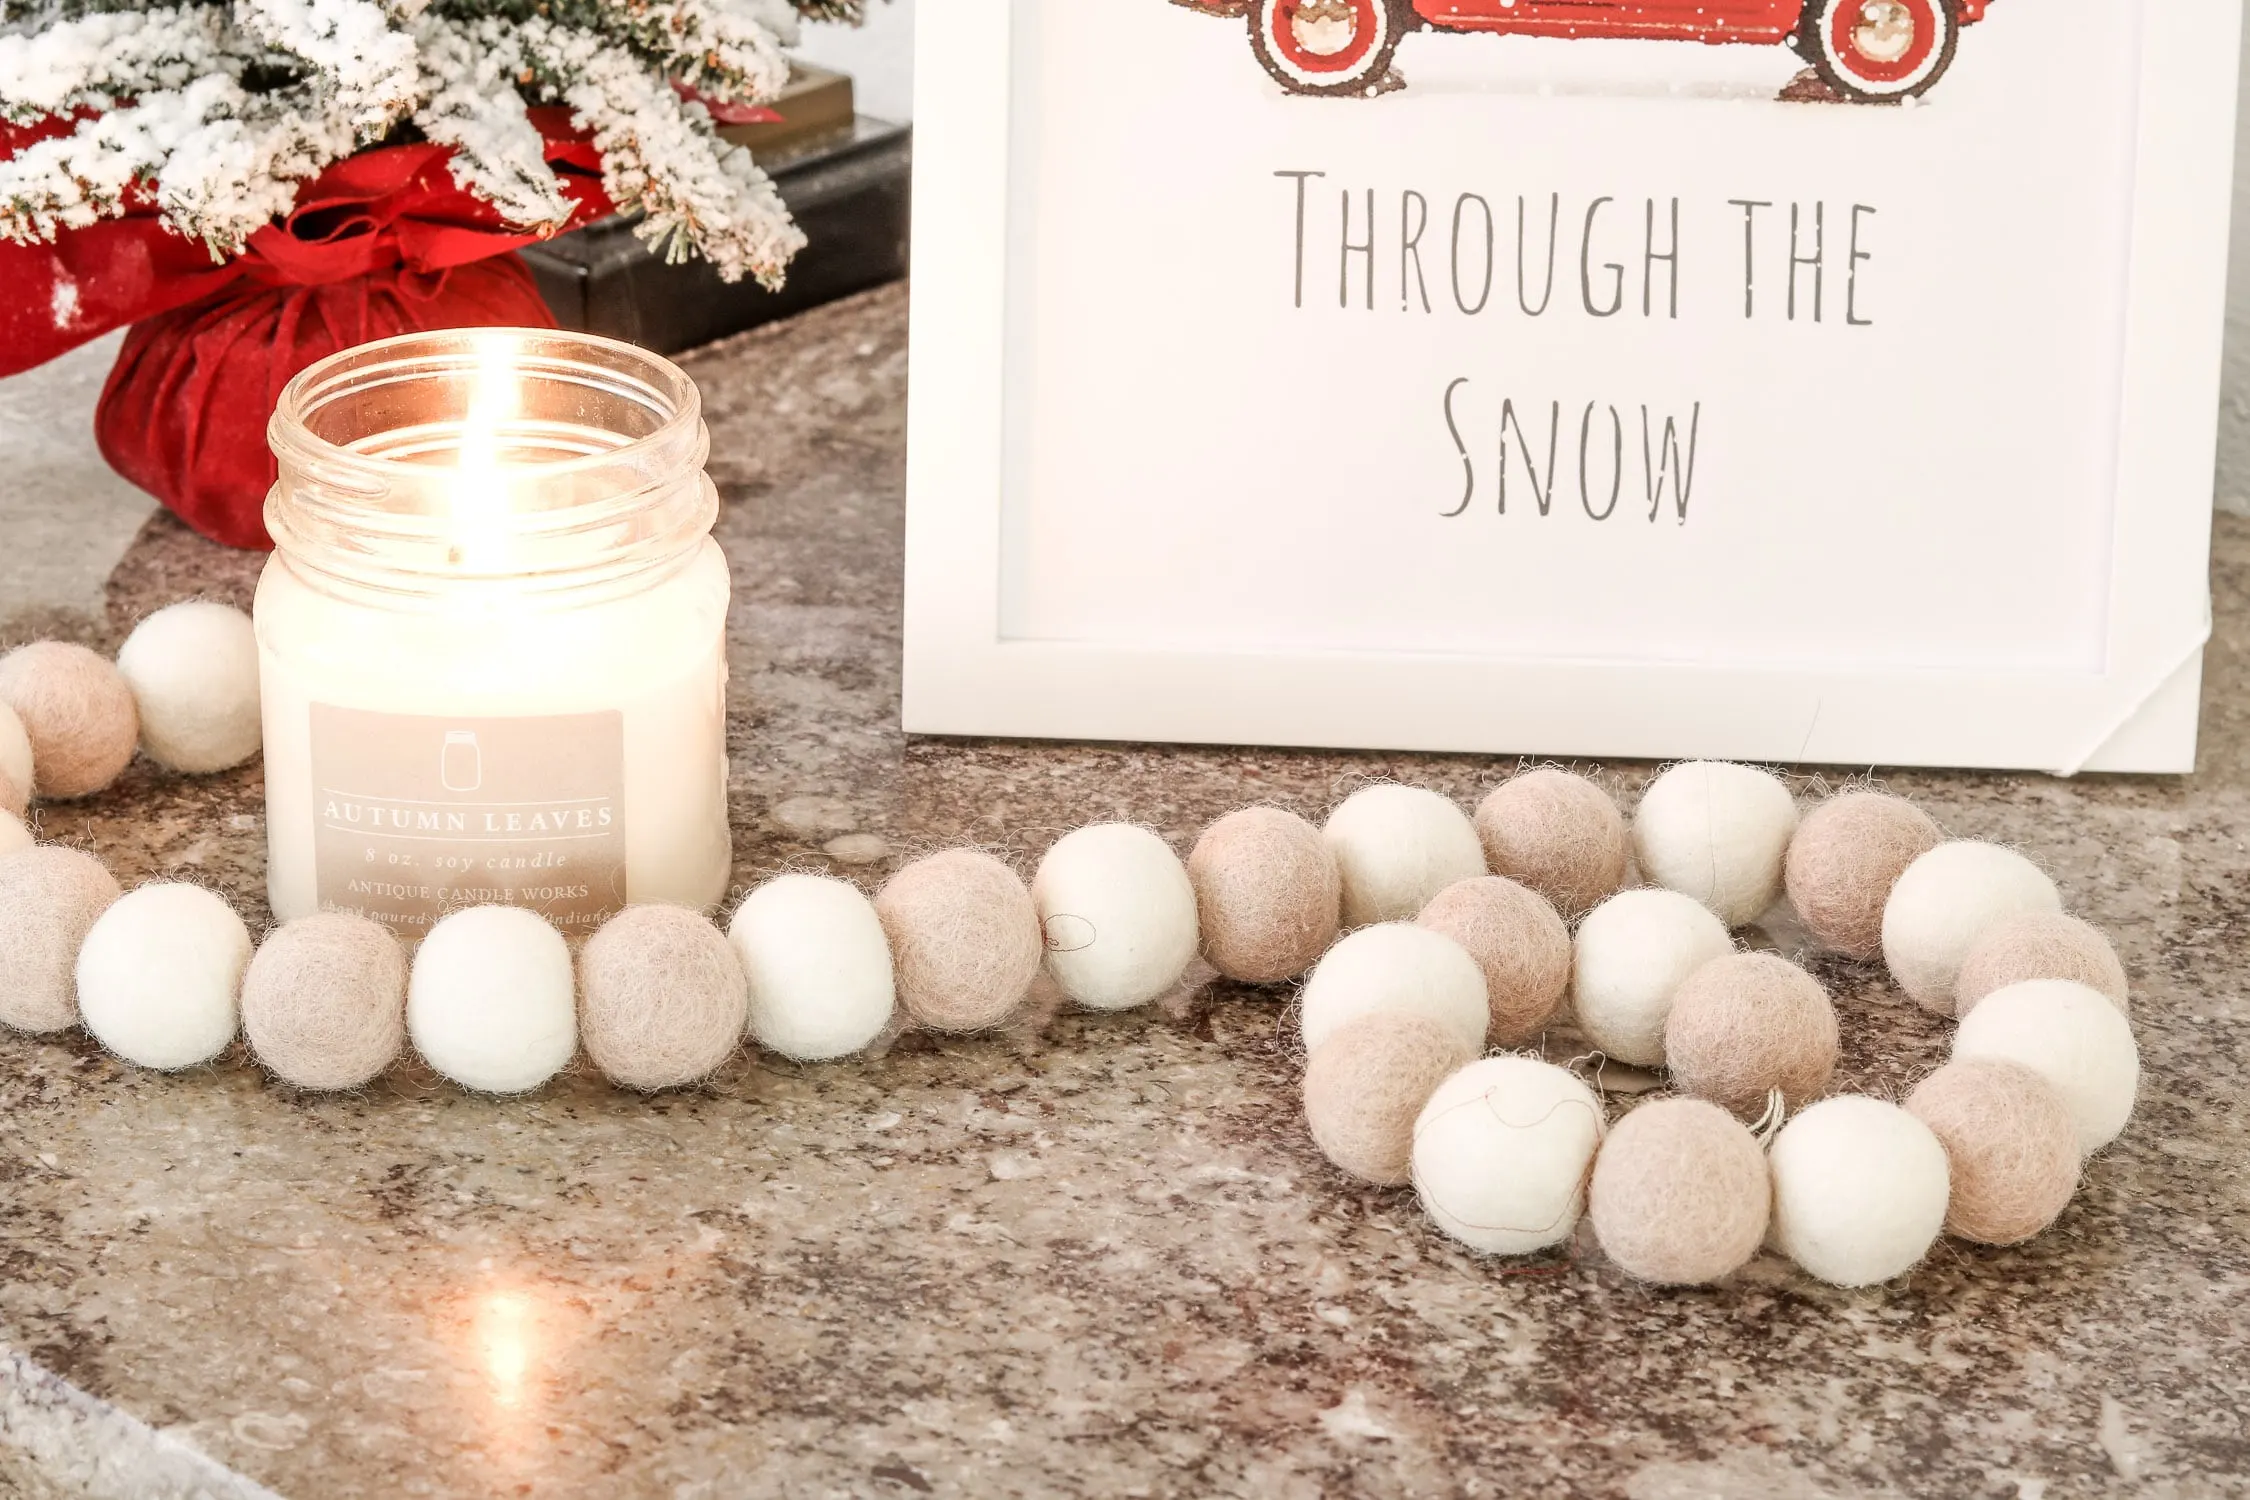 Christmas printable decor displayed with Antique Candle works candle and felt beads